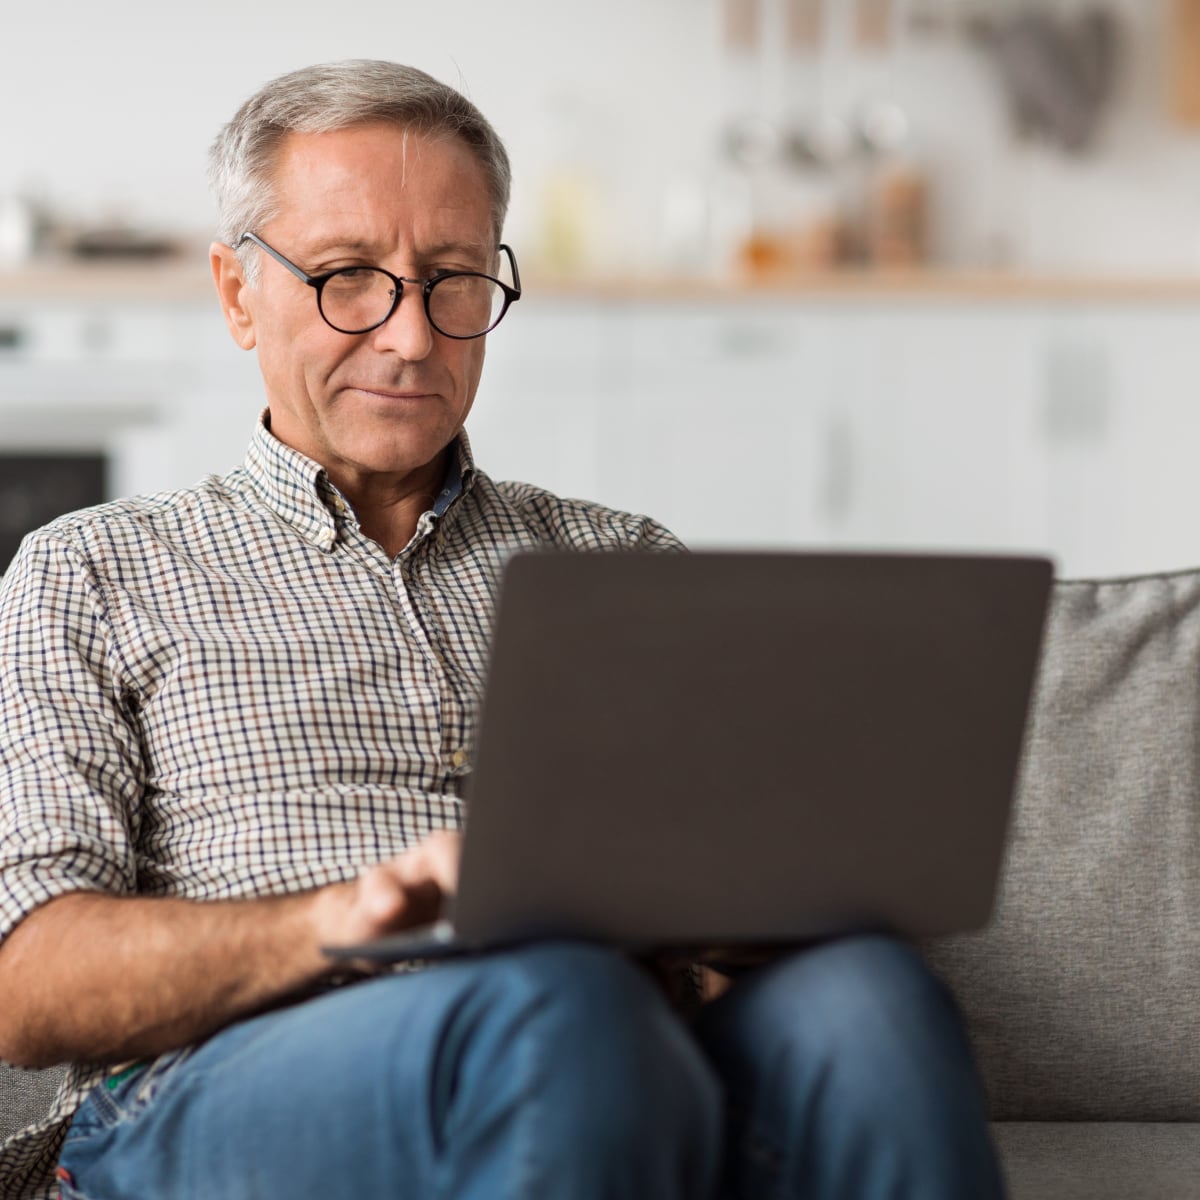 Senior male using a laptop while sitting on a couch